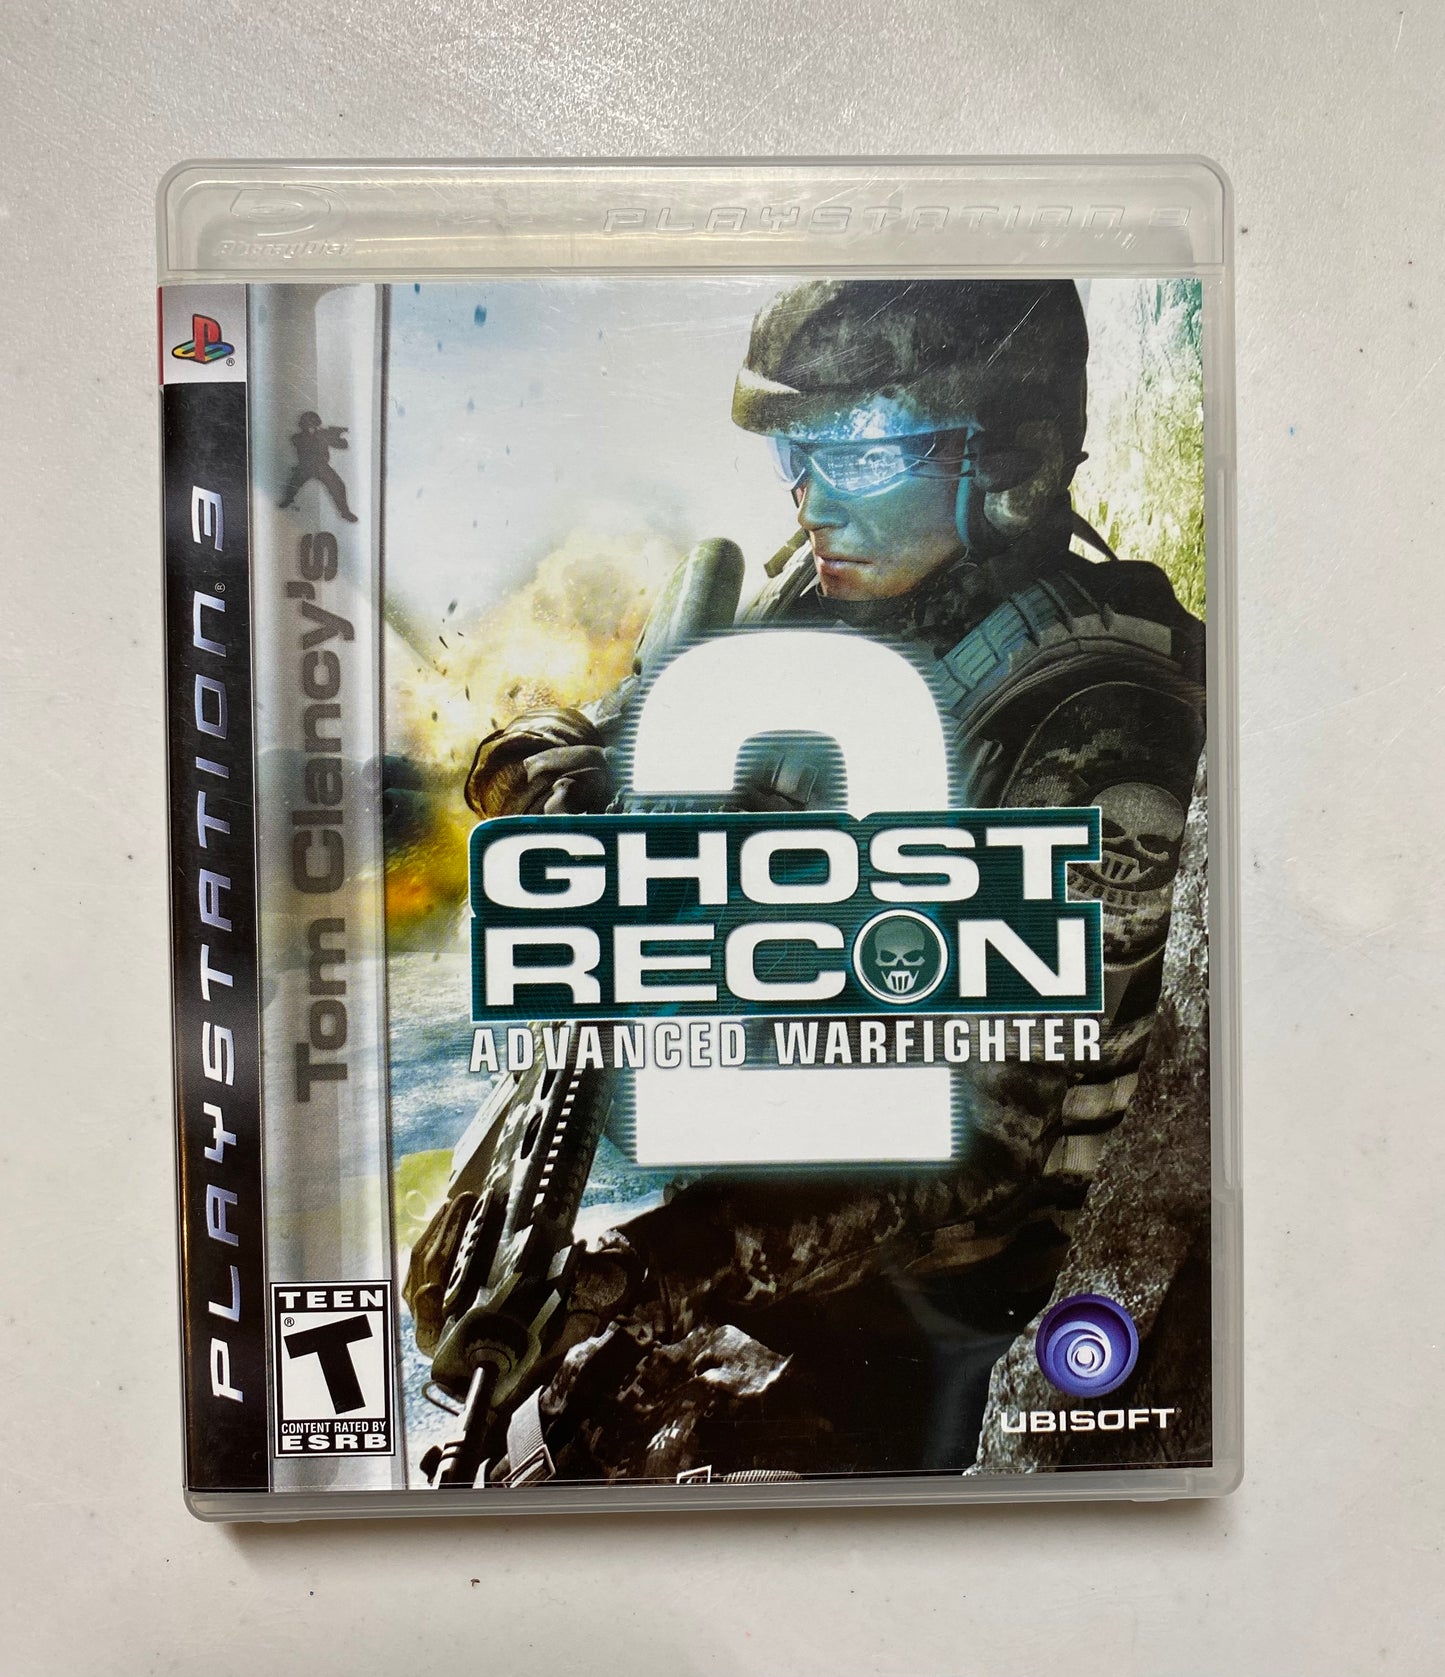 Tom Clancy’s Ghost Recon 2 Advanced Warfighter PlayStation 3 Game 34347-8